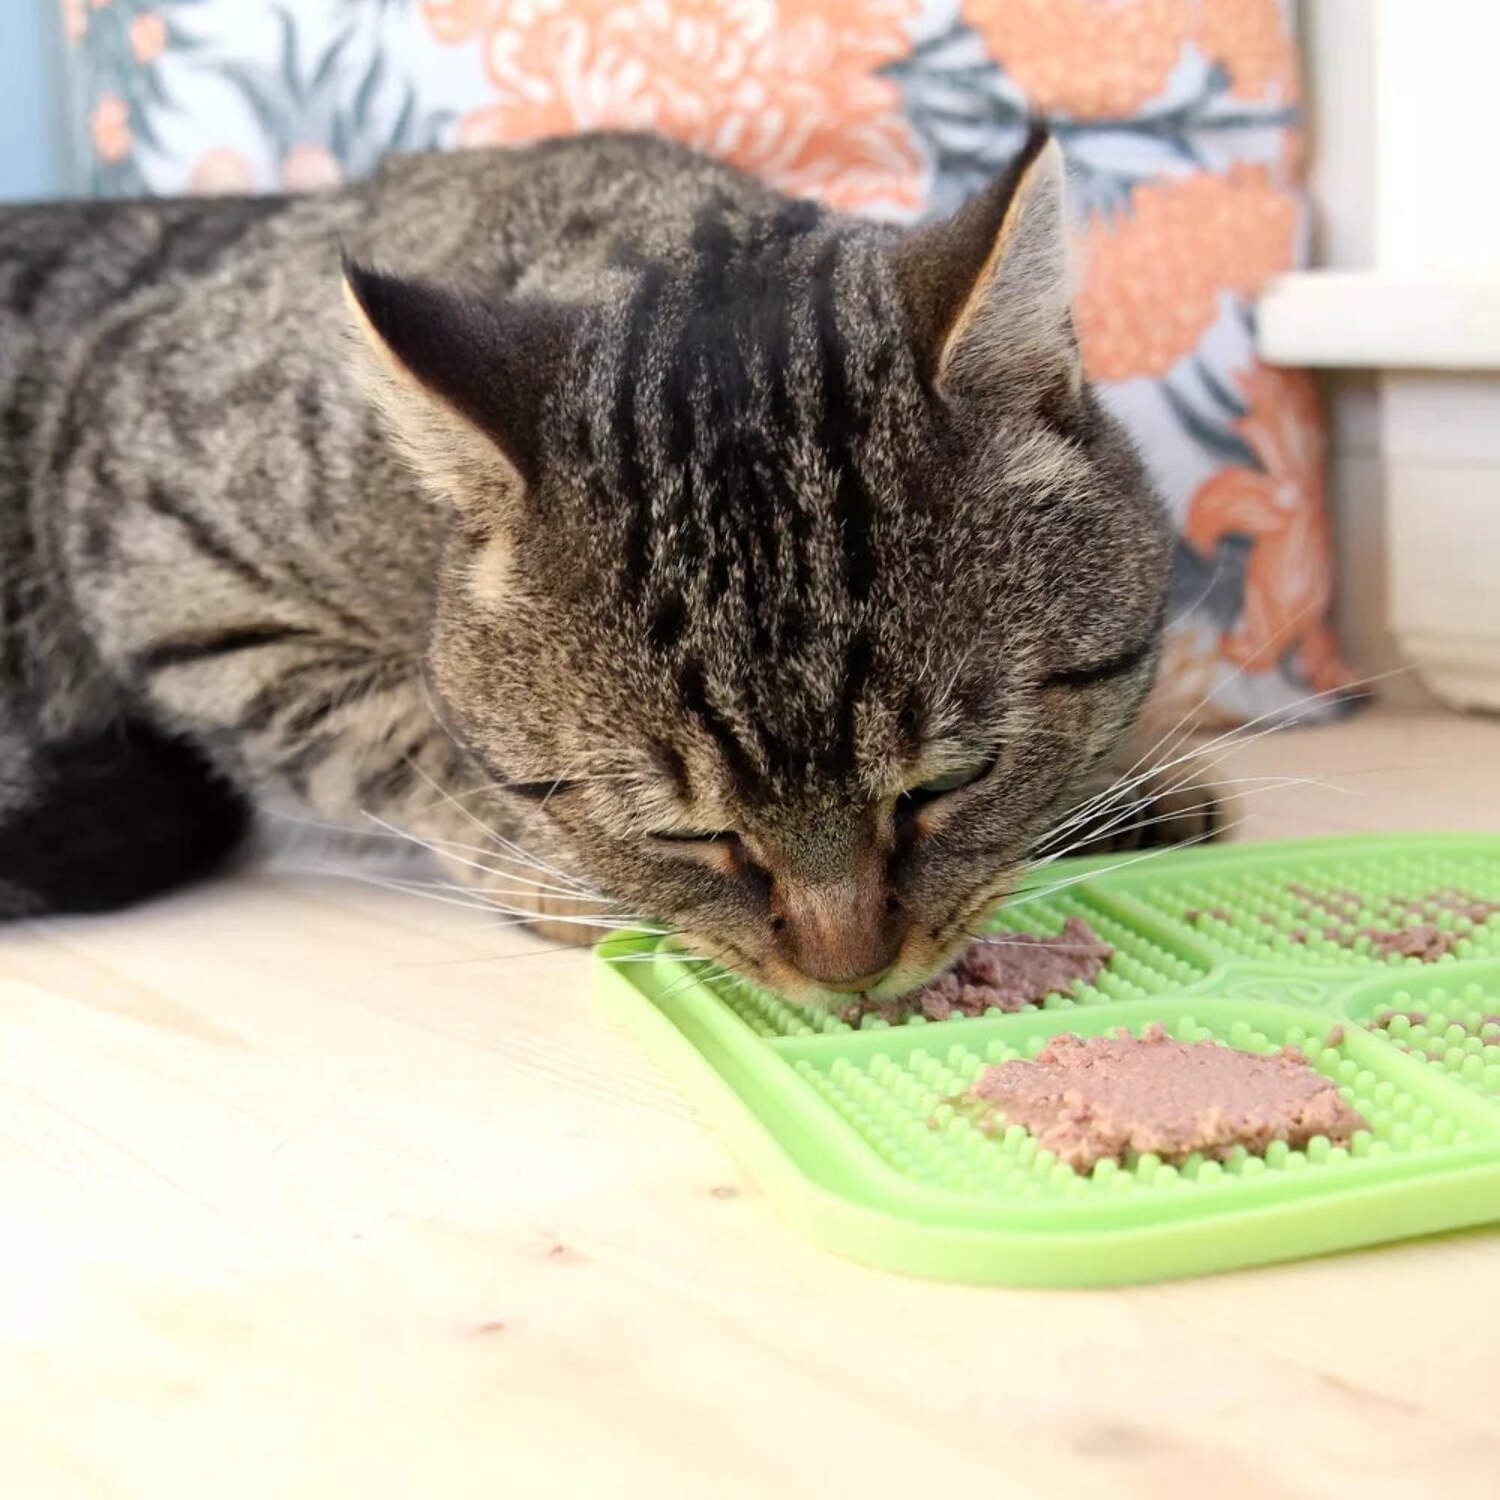 Pet Zone® Boredom Busterz™ Engage Slow Feeder Licking Mat